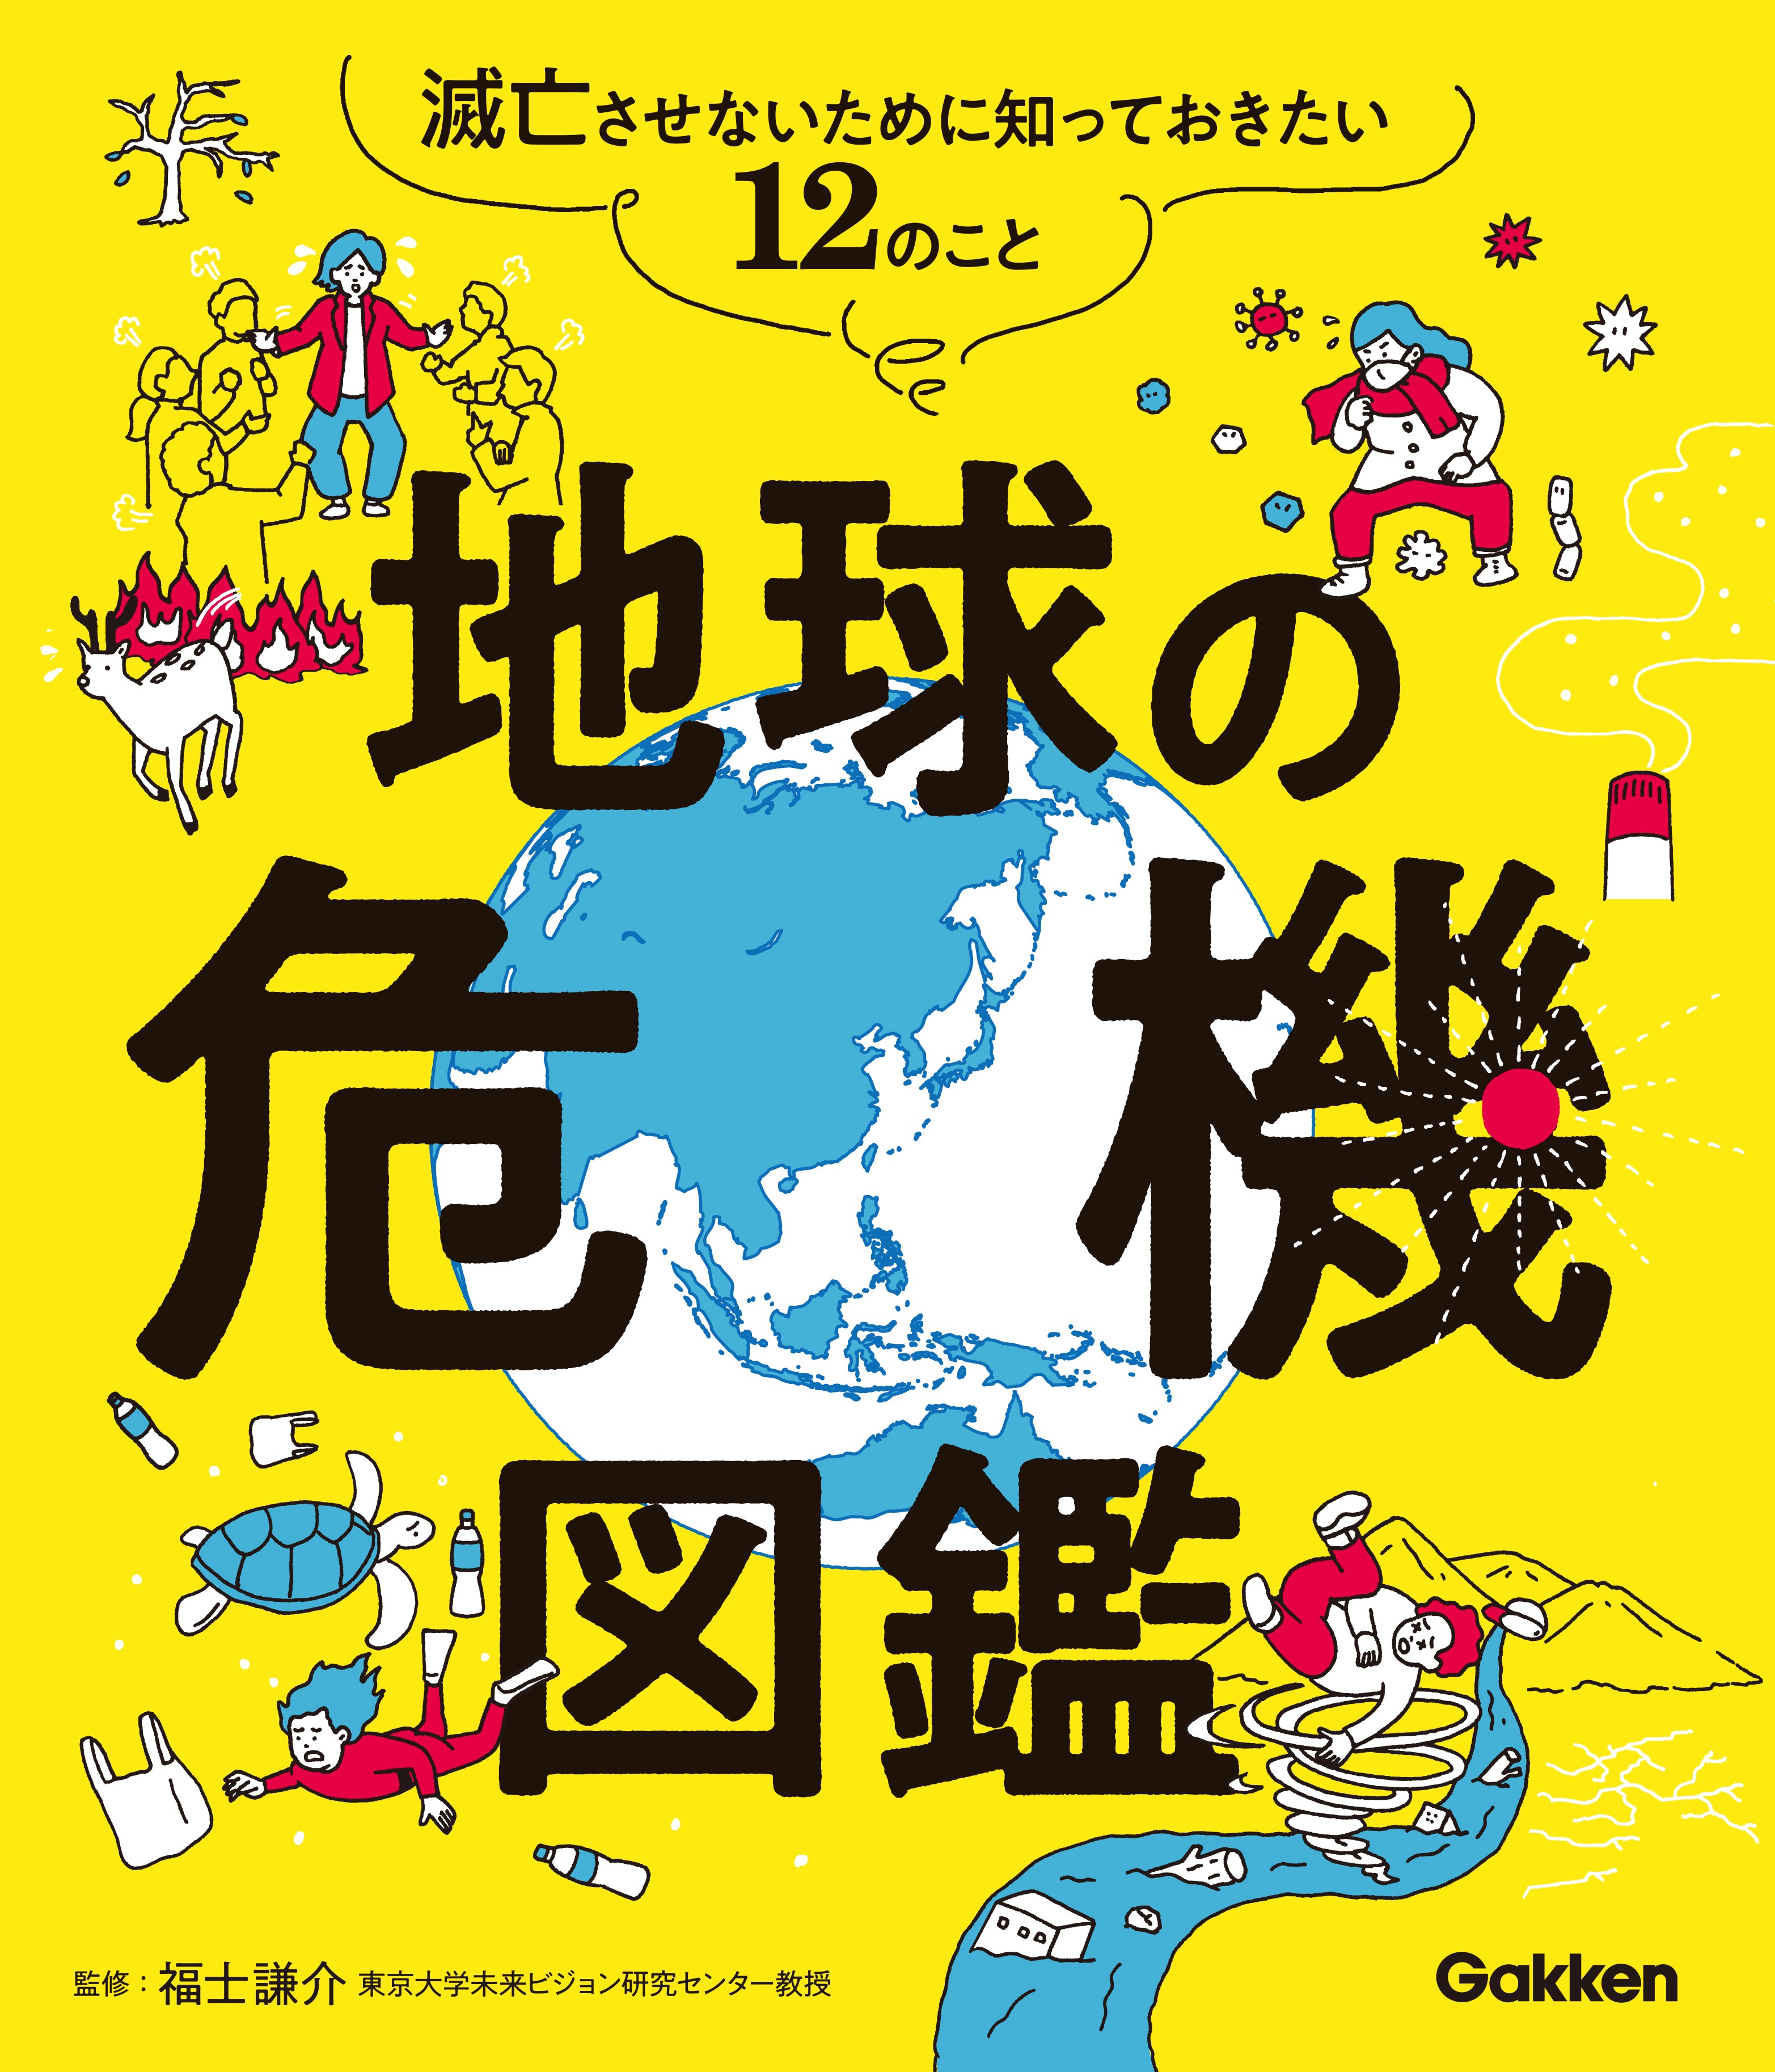 A yellow cover with illustrations of the earth and environmental issues